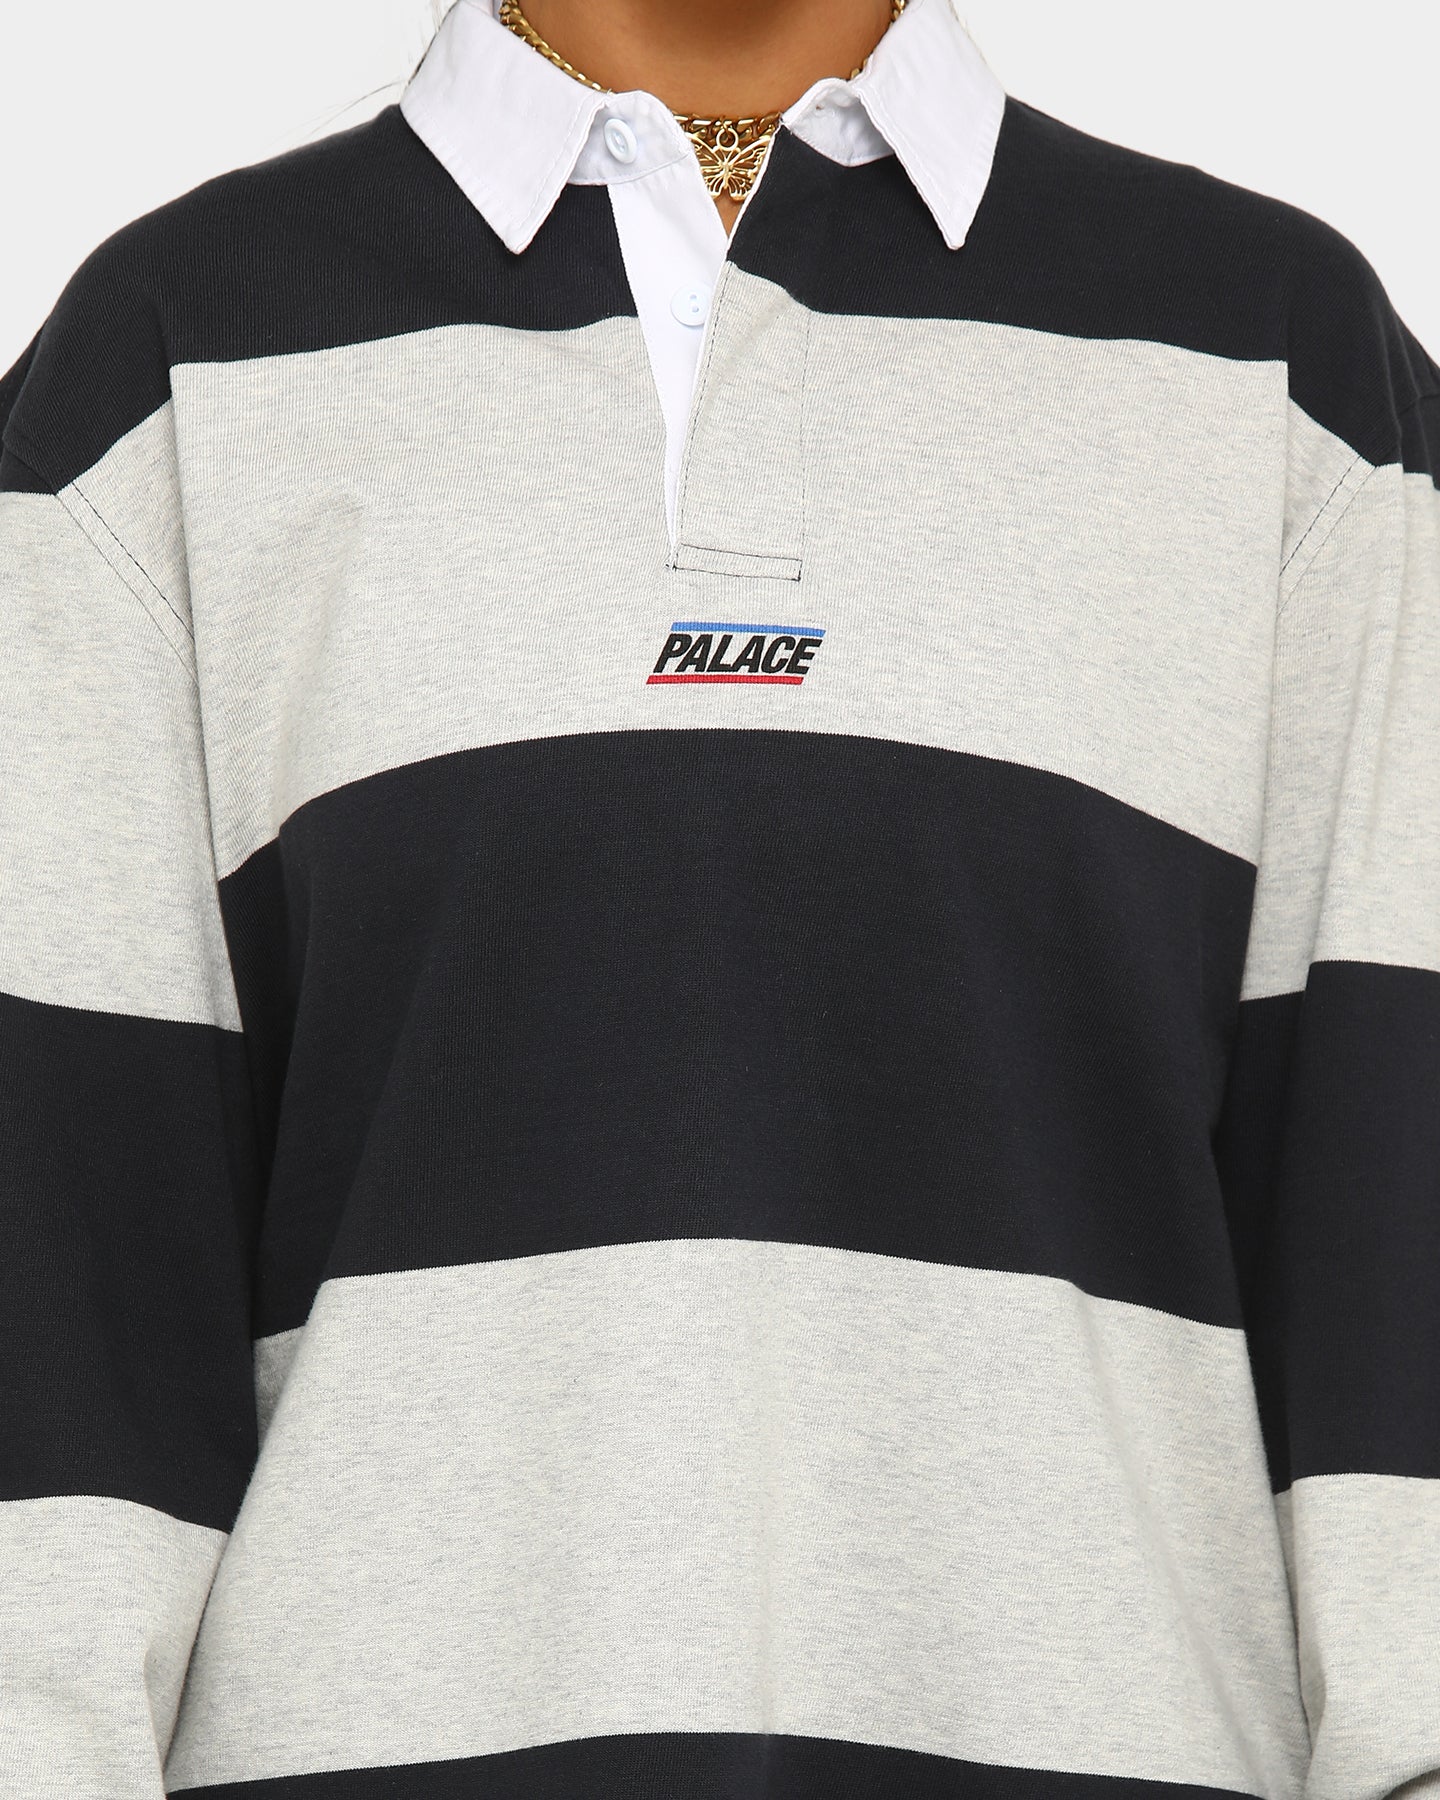 palace polo rugby